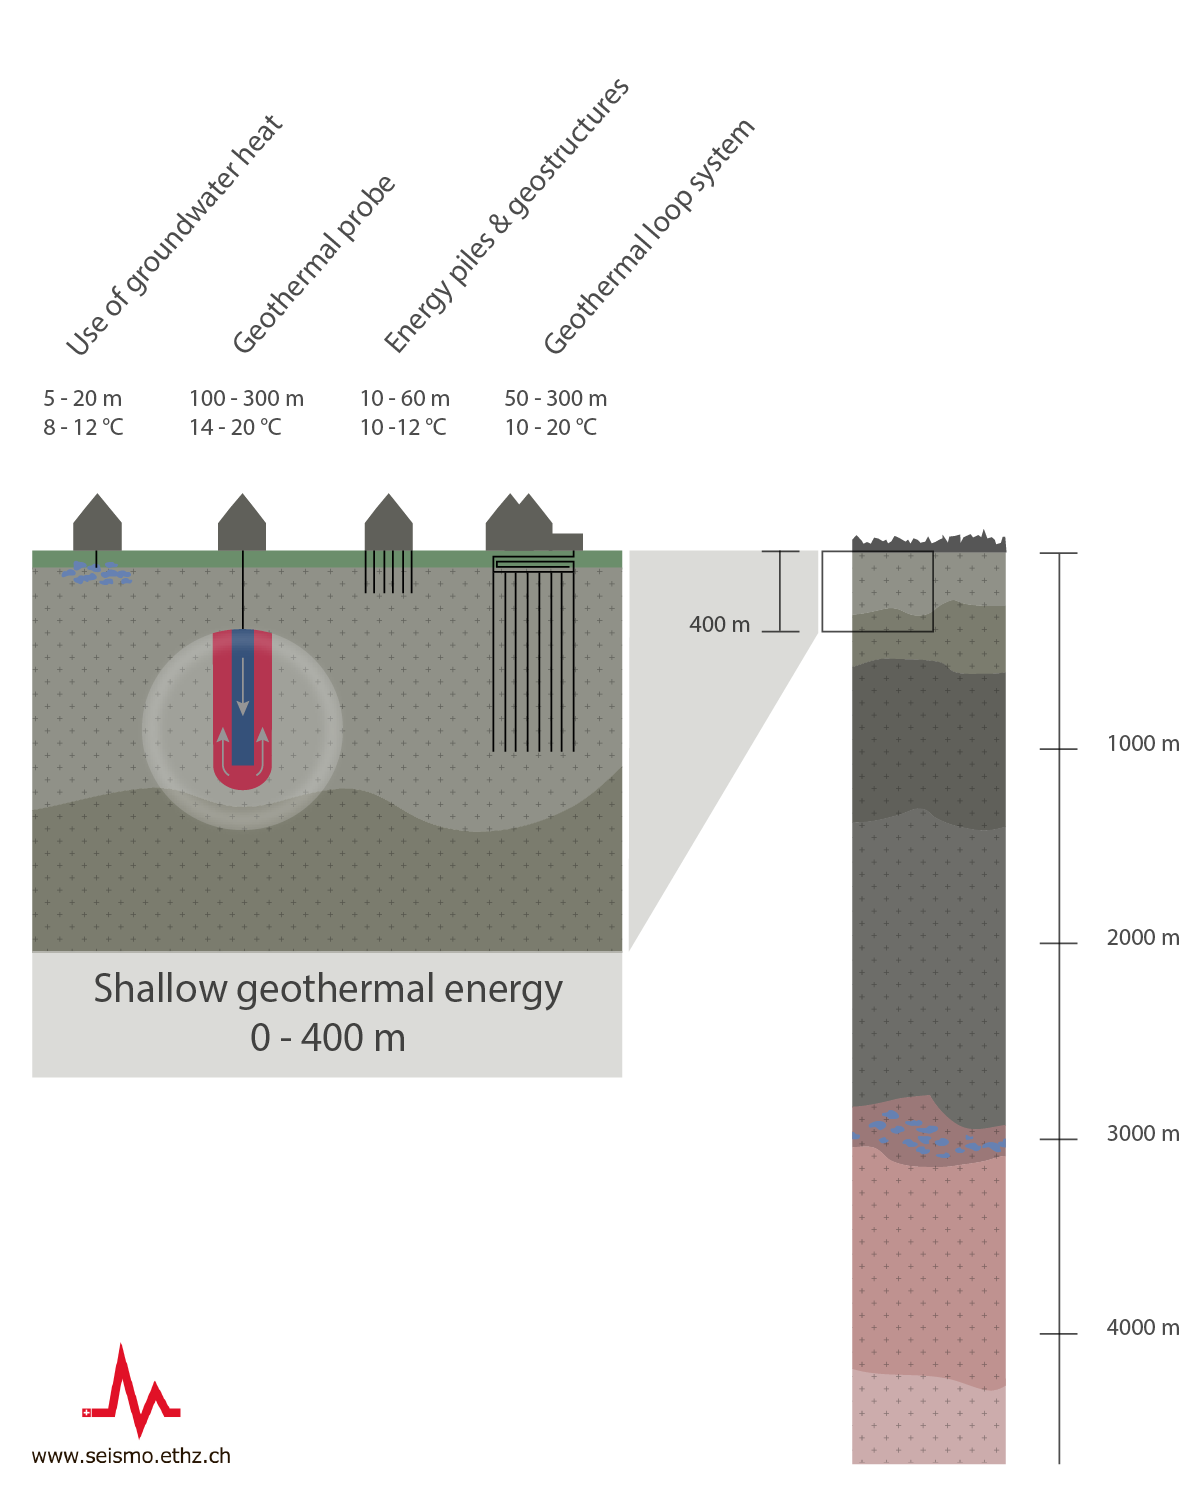 Shallow geothermal energy